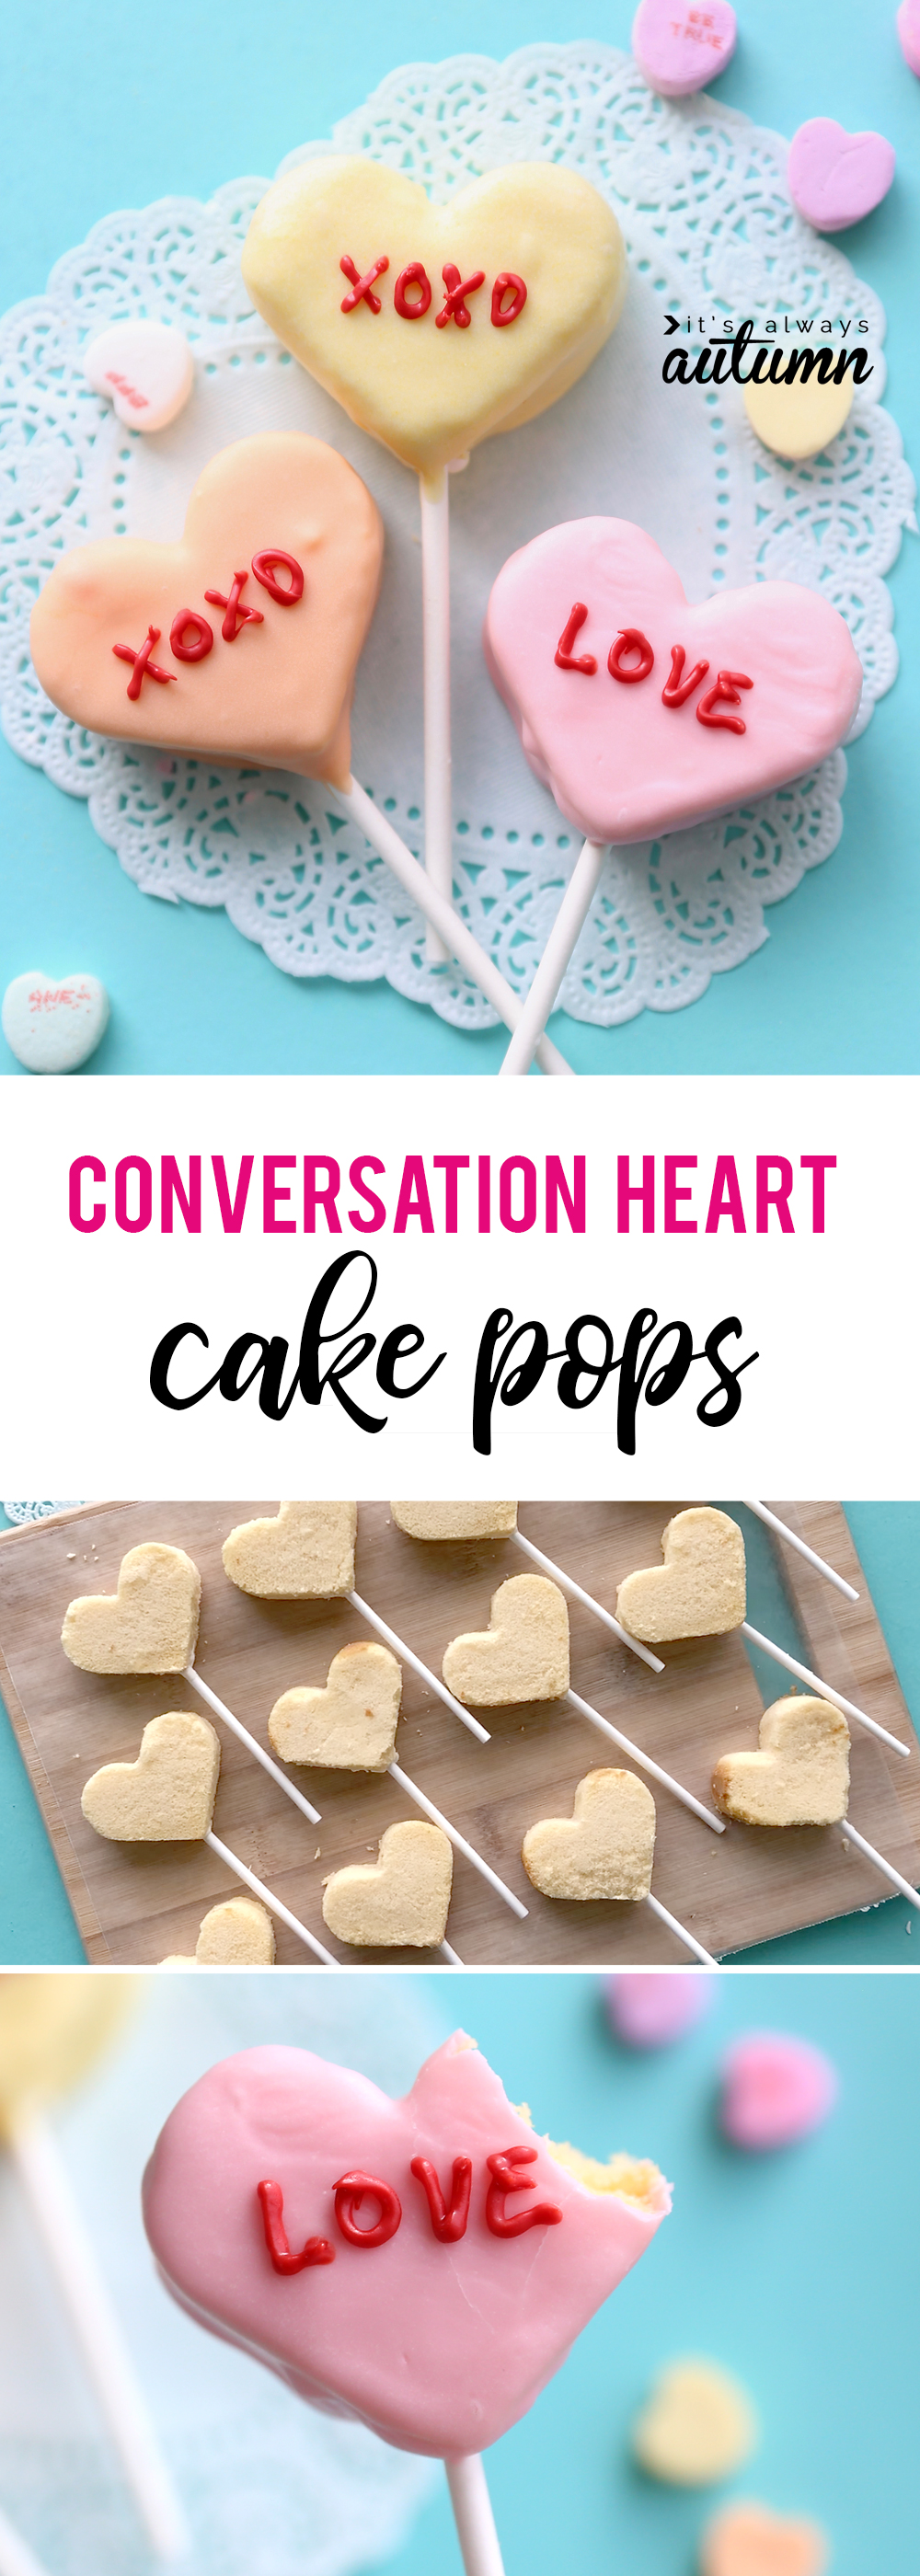 Cake pops decorated to look like conversation hearts